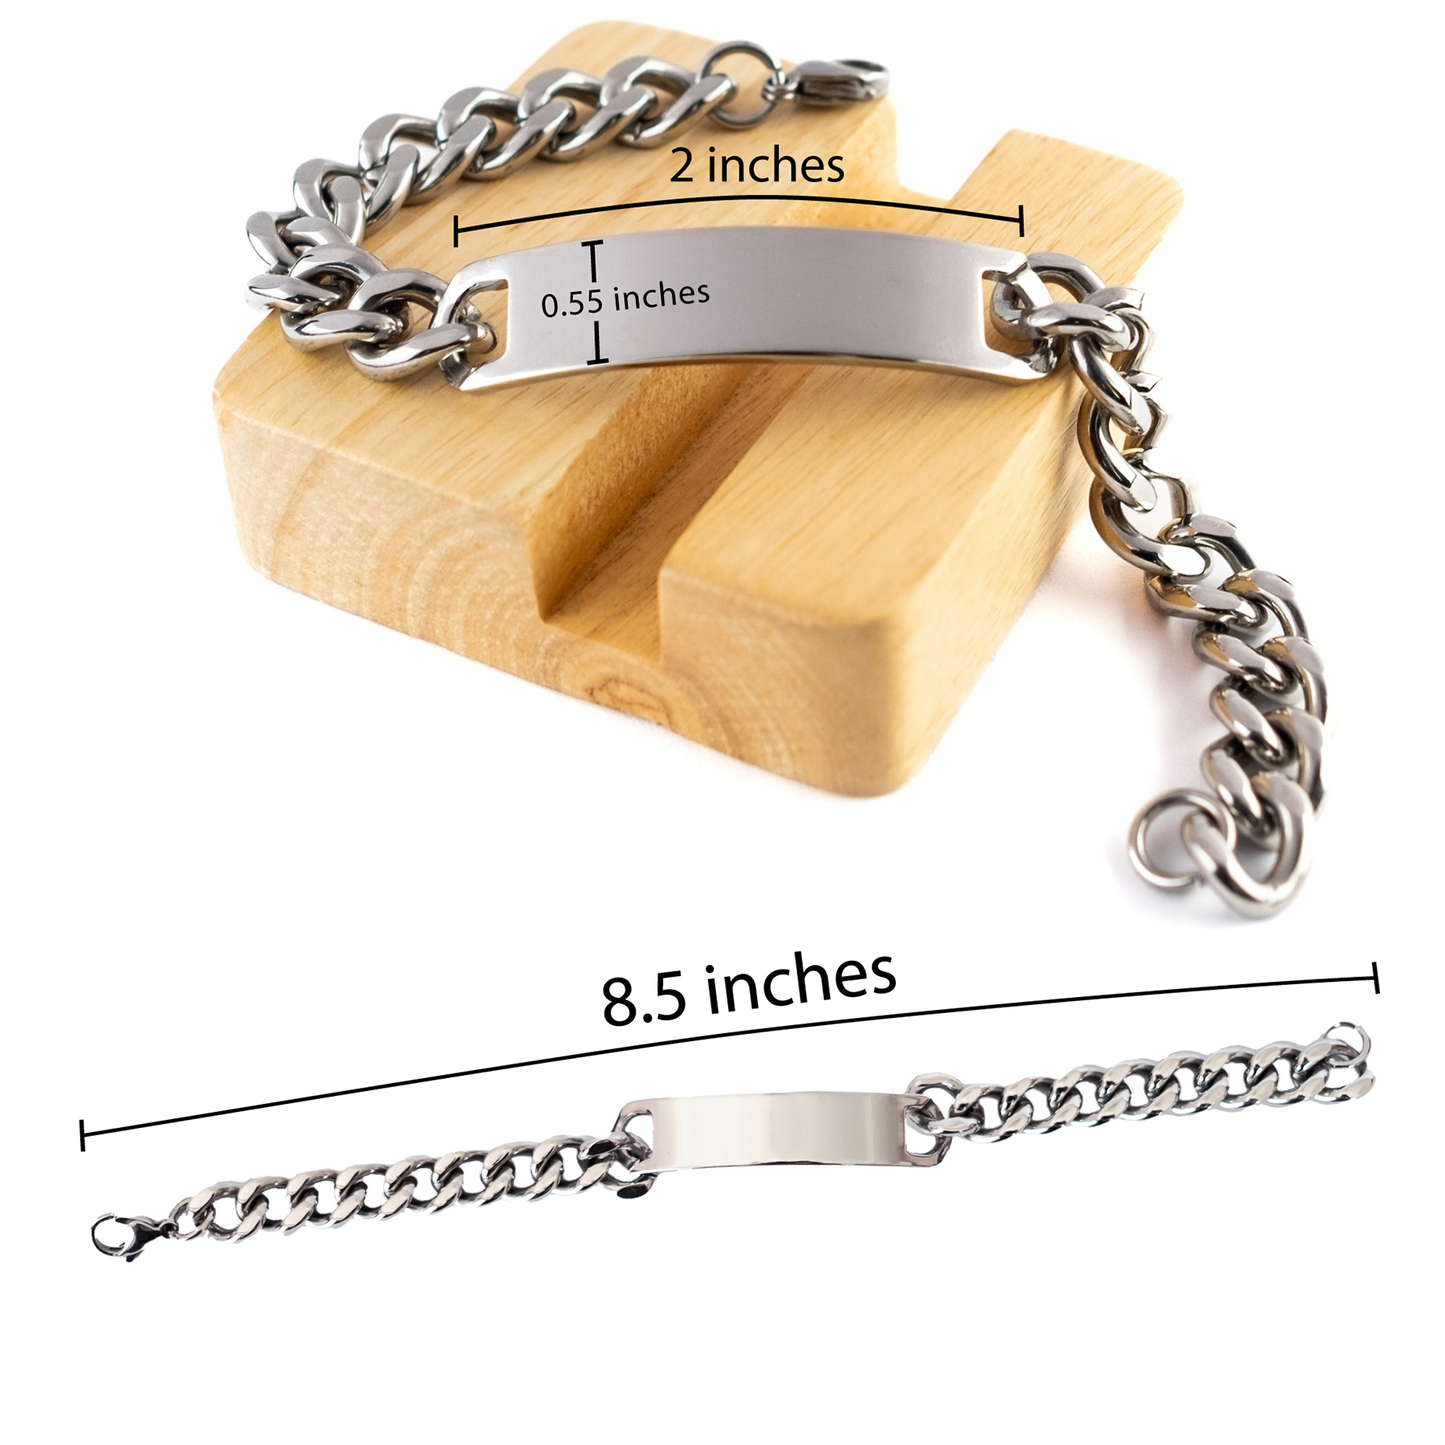 Son In Law Motivational Gifts from Mother In Law, Remember to never give up no matter what, Inspirational Birthday Cuban Chain Stainless Steel Bracelet for Son In Law